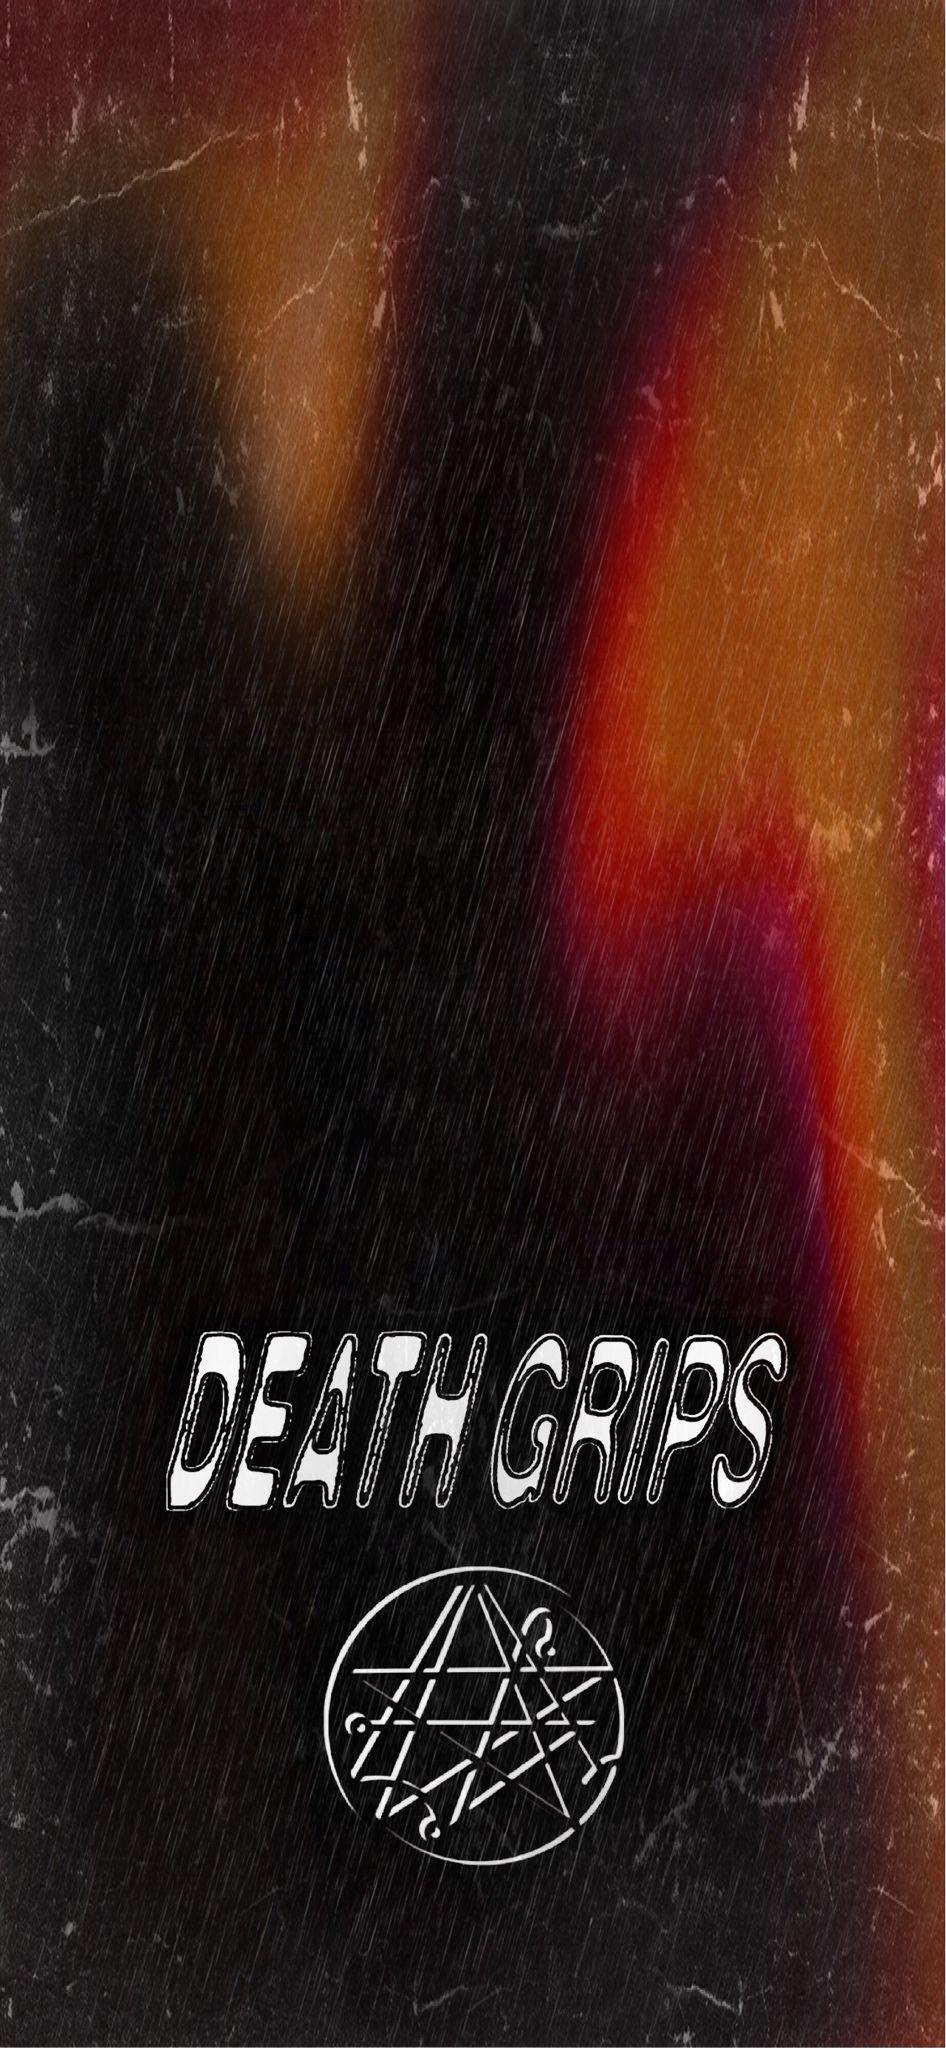 Death Grips Wallpapers Top Free Death Grips Backgrounds Wallpaperaccess